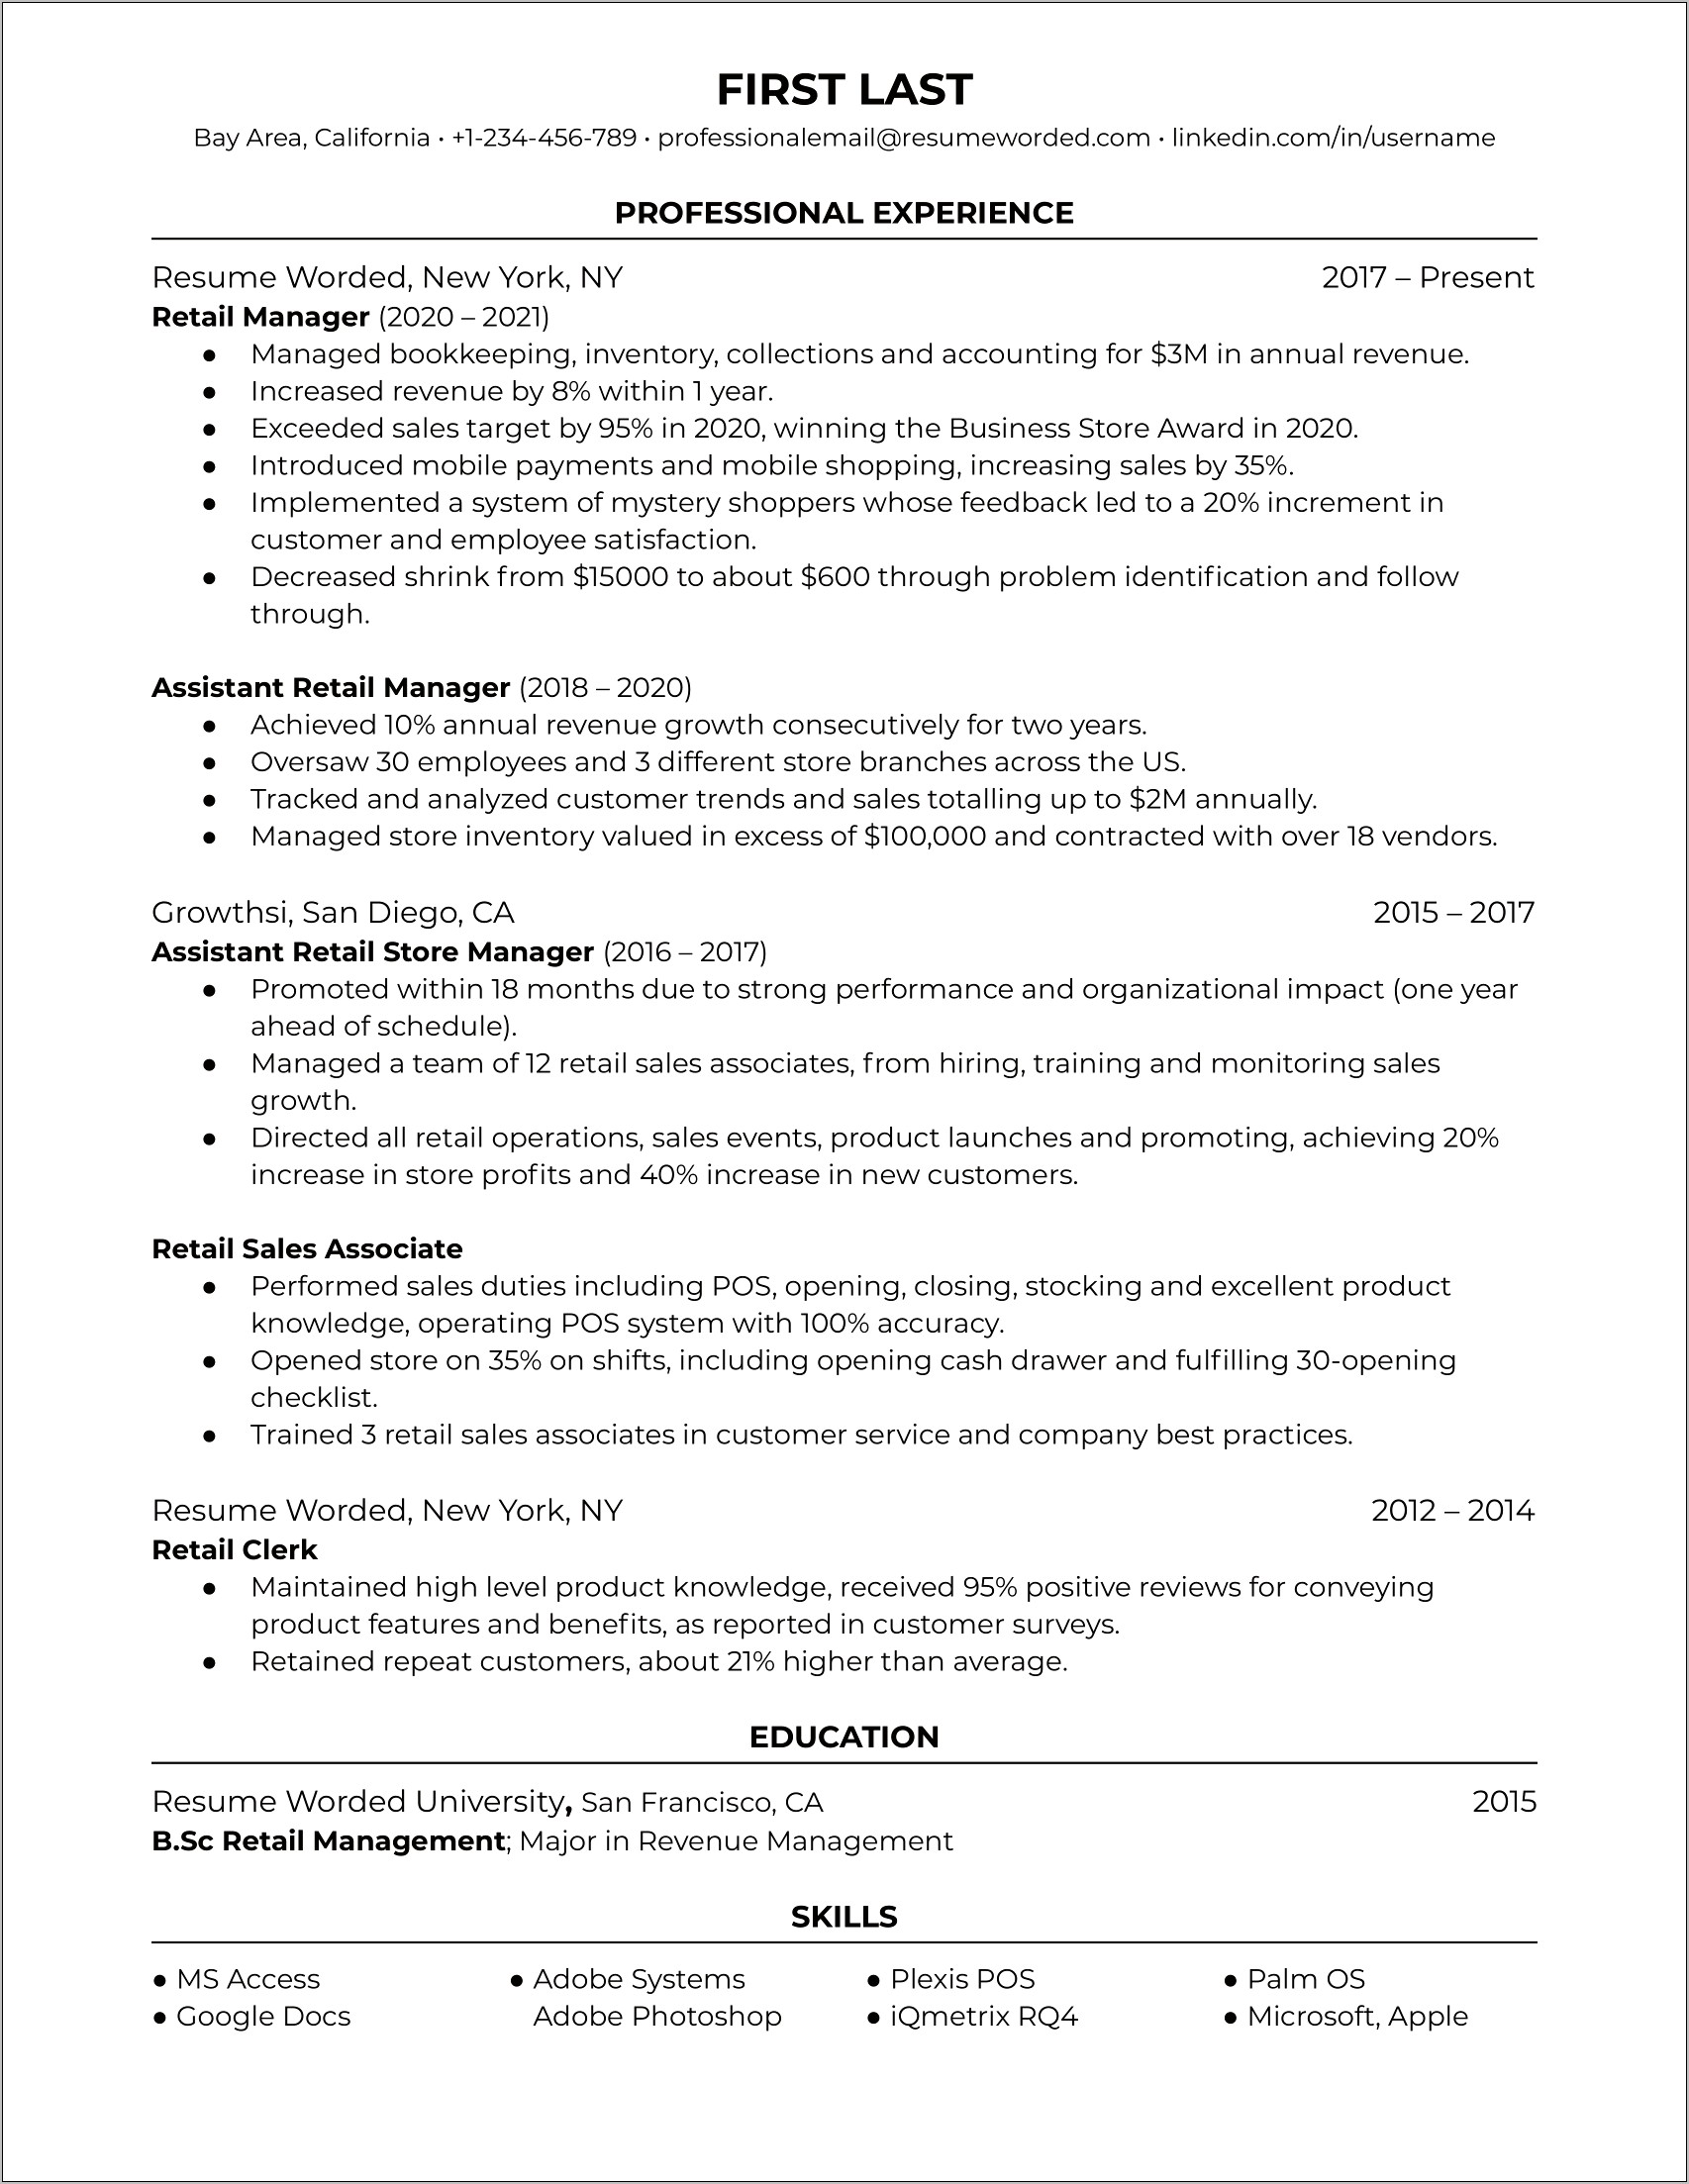 Resume That Shows Manager Who Open Store